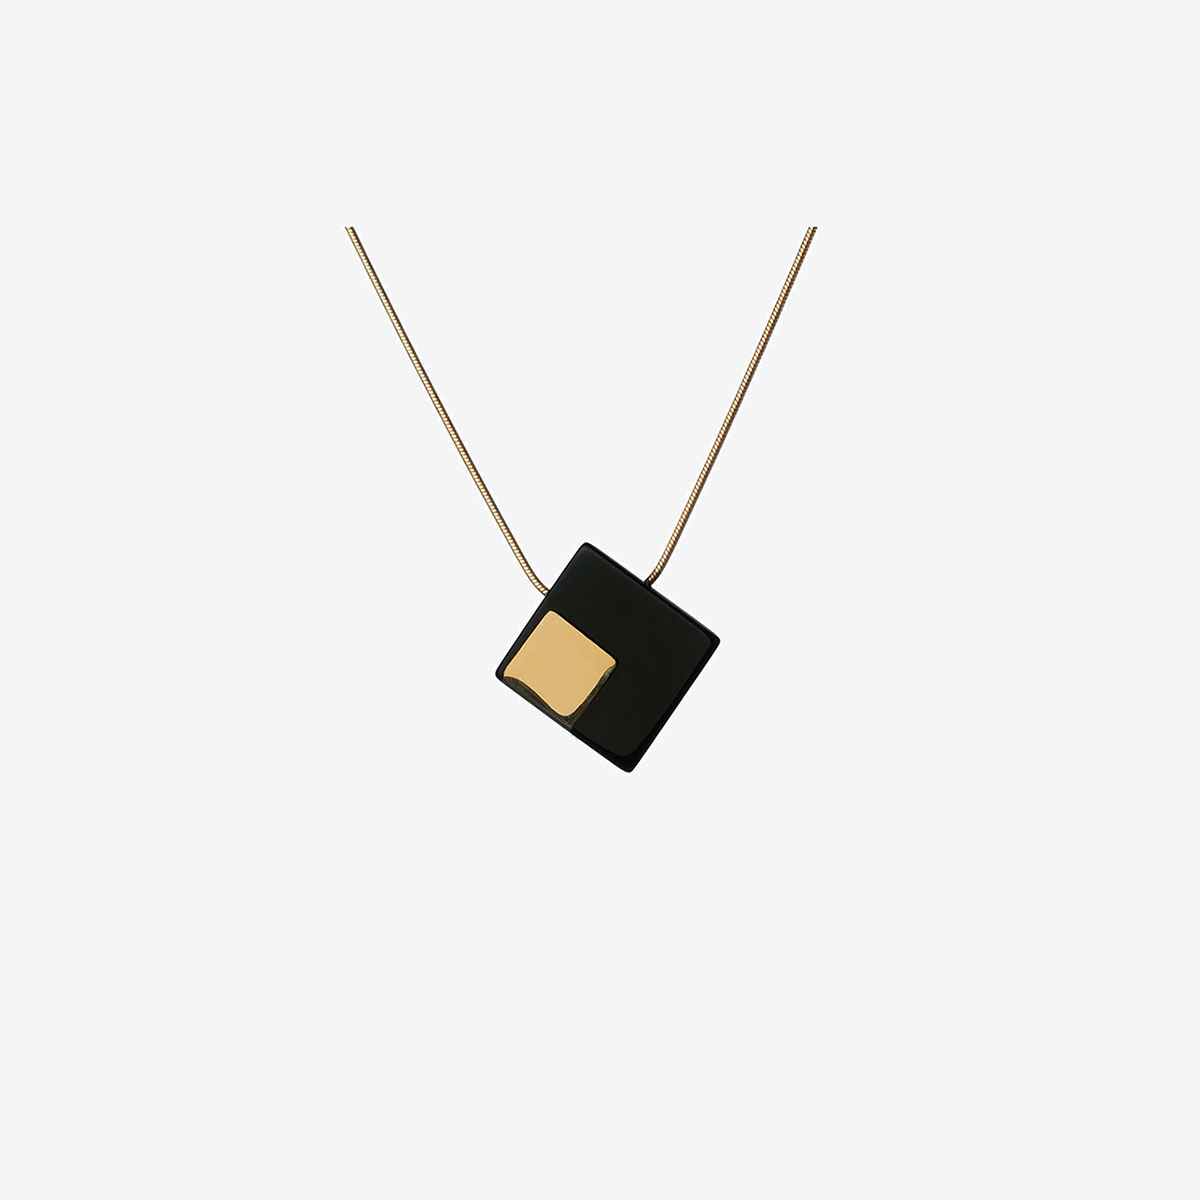 Handmade Emi necklace in 9k or 18k gold, sterling silver and onyx designed by Belen Bajo